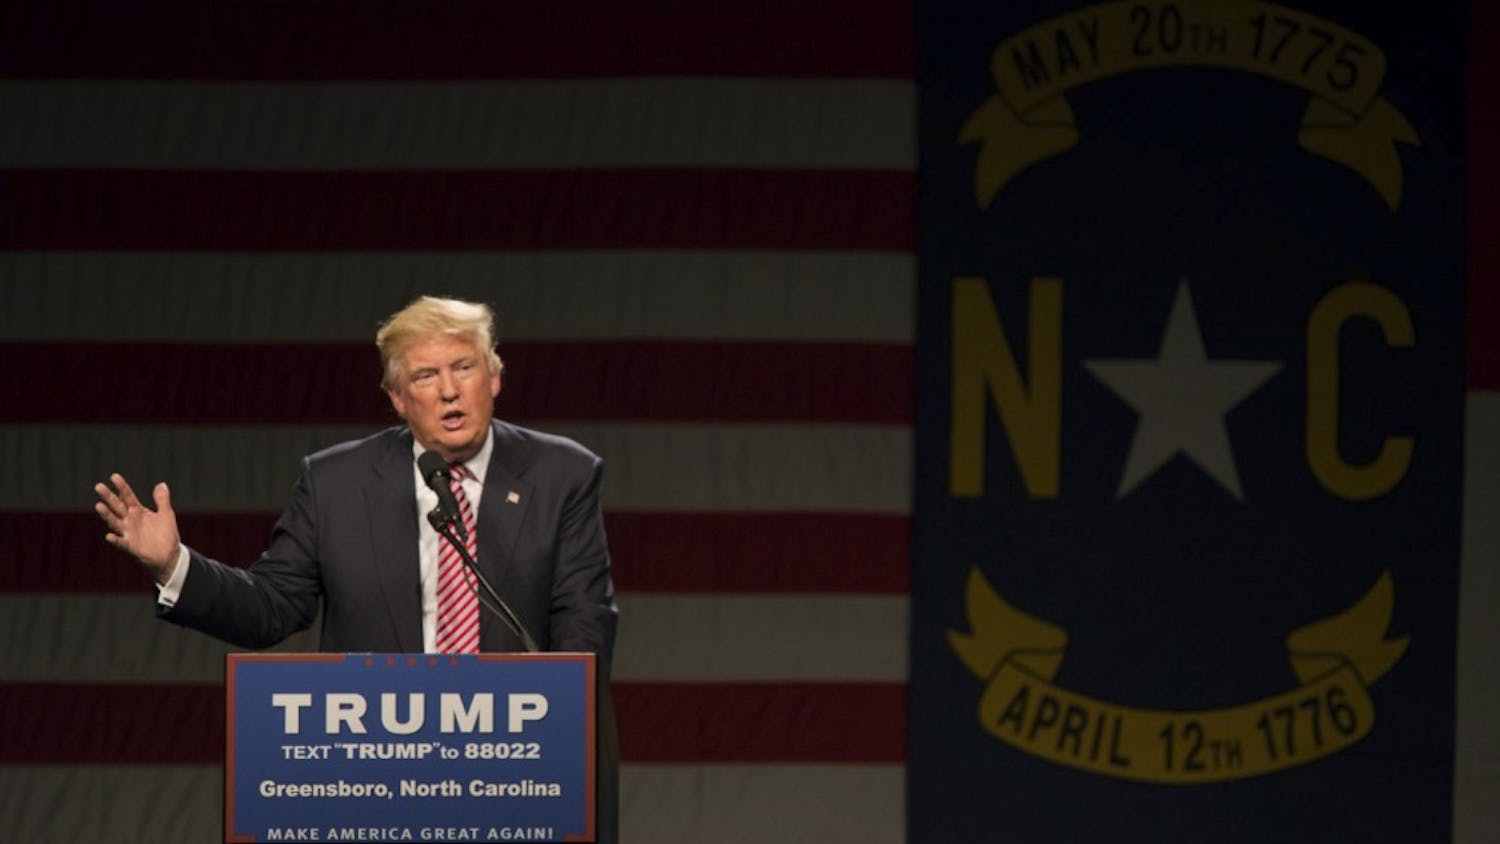 Republican presidential candidate Donald Trump spoke in the Greensboro Coliseum on Tuesday, June 14th.